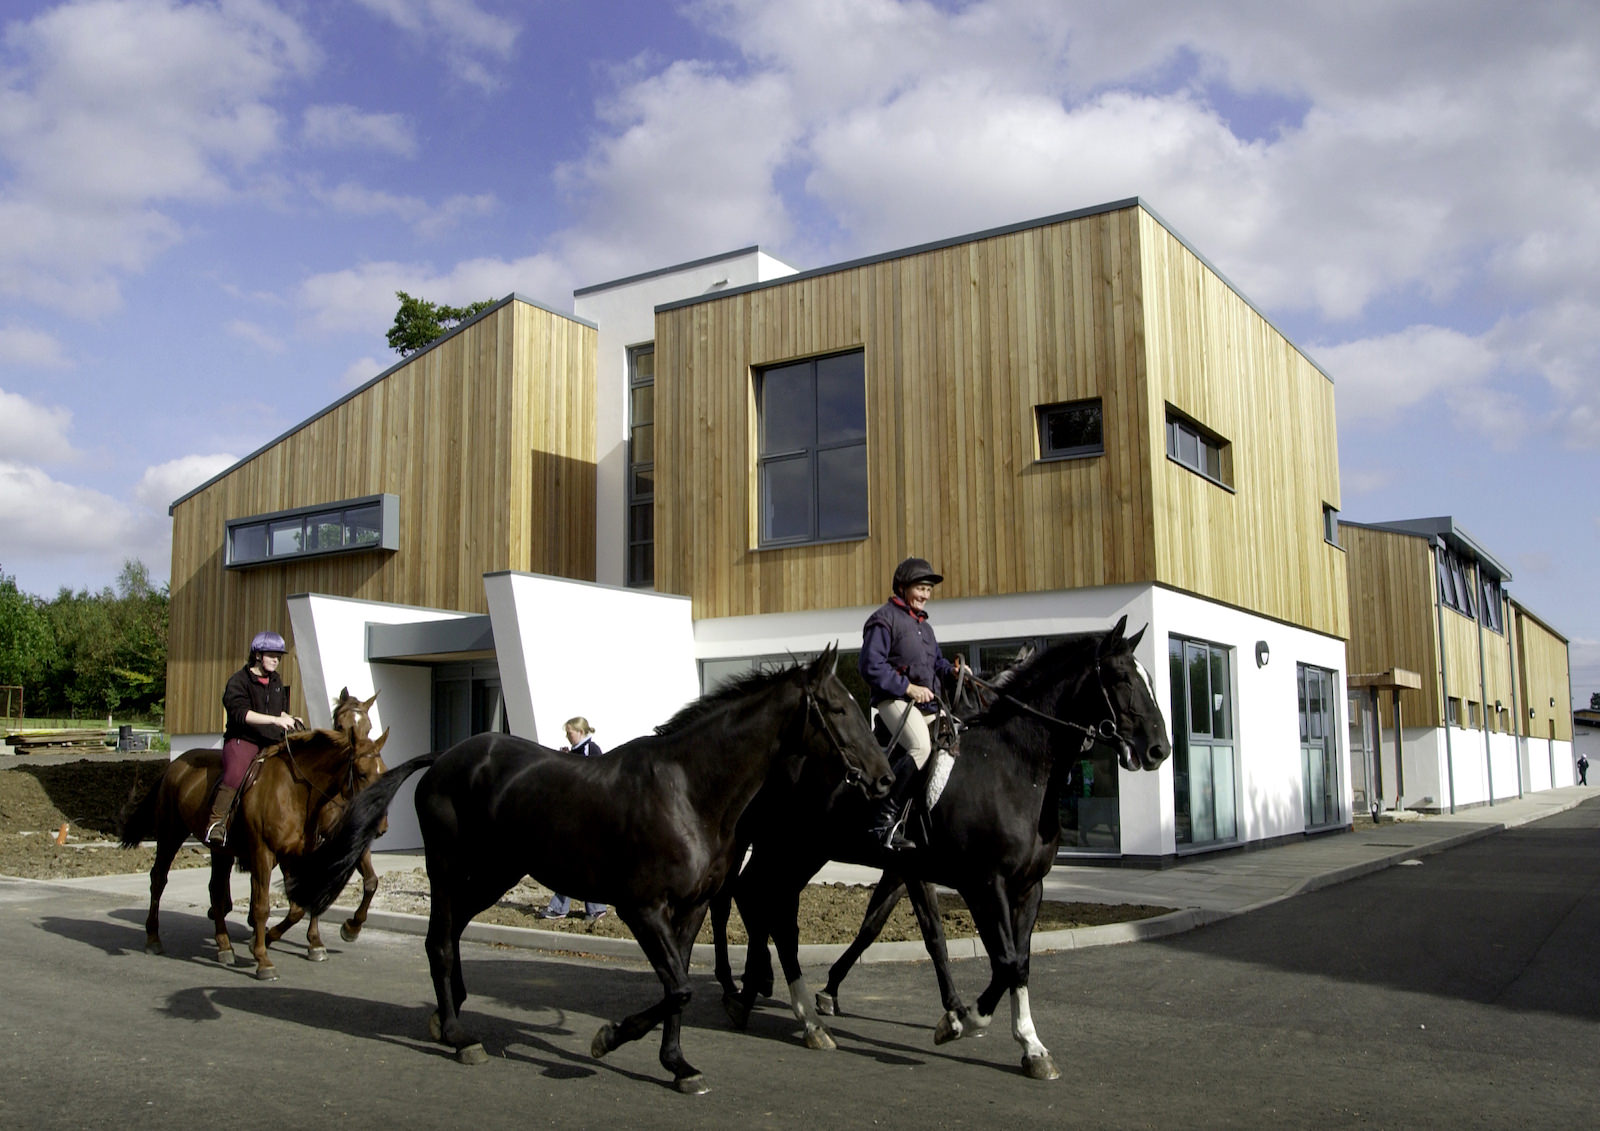 external view of the riseholme equine centre with people enjoying riding horses